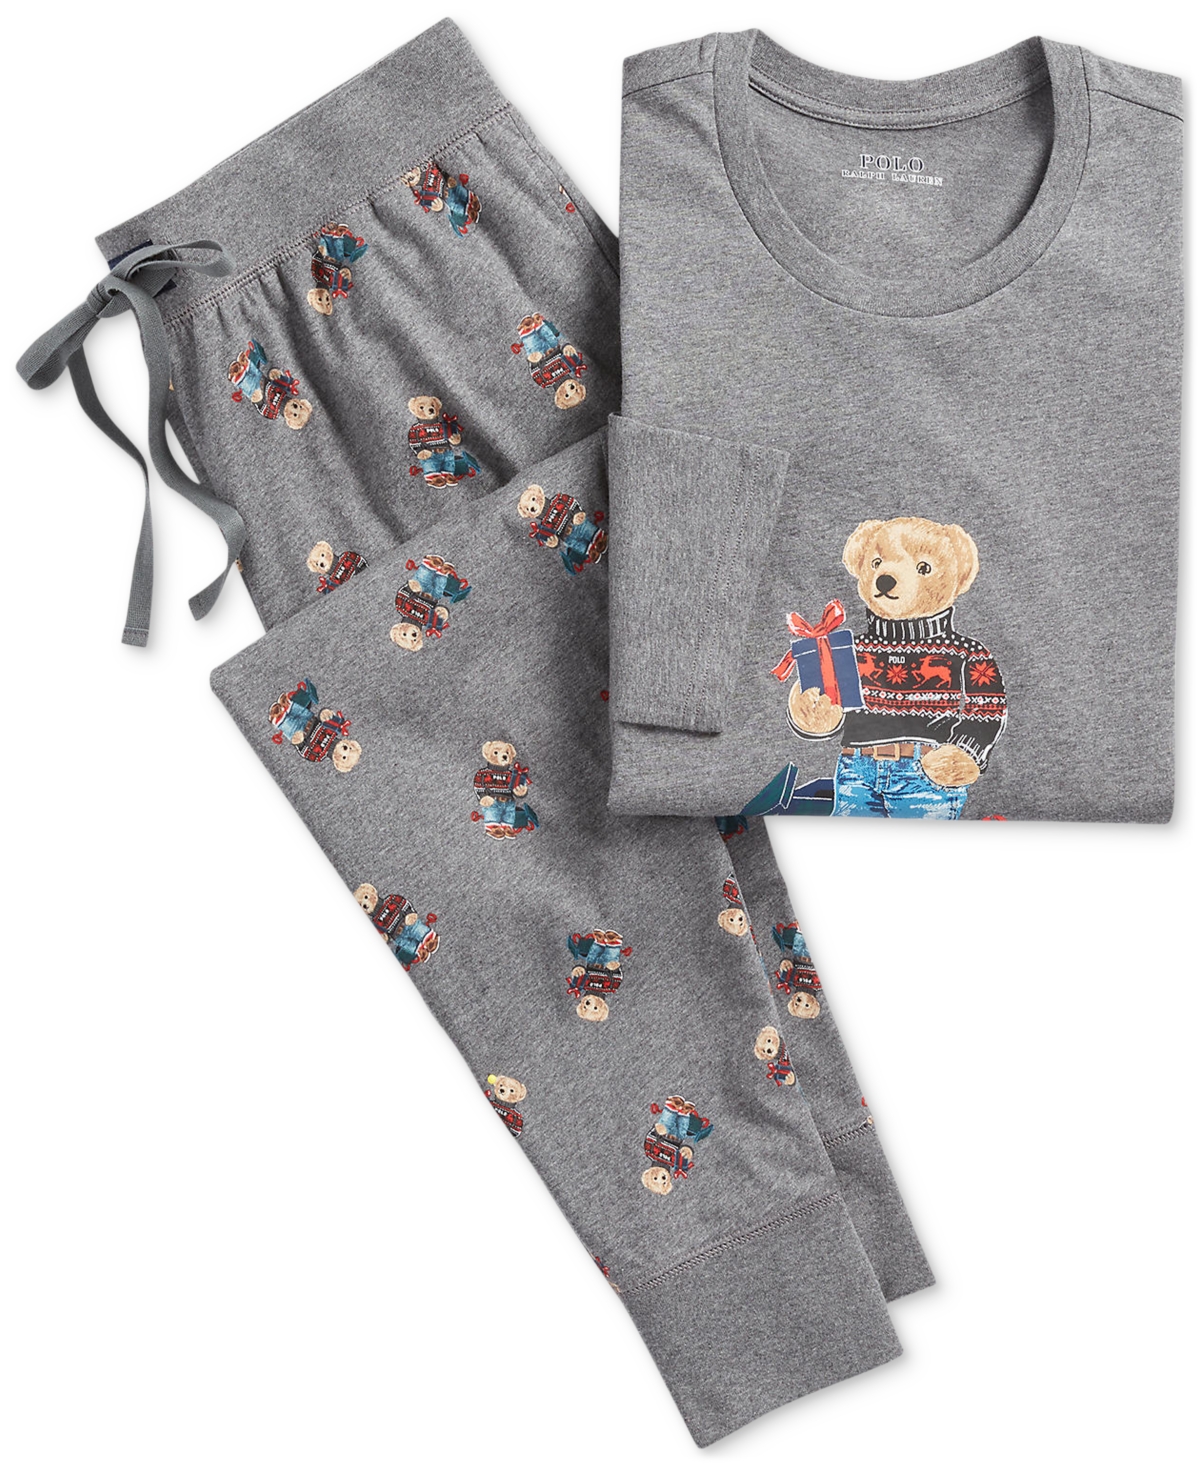 Polo Ralph Lauren Men's 2-pc. Cotton Polo Bear Pajamas Set In Charcoal Heather With Holiday Bear